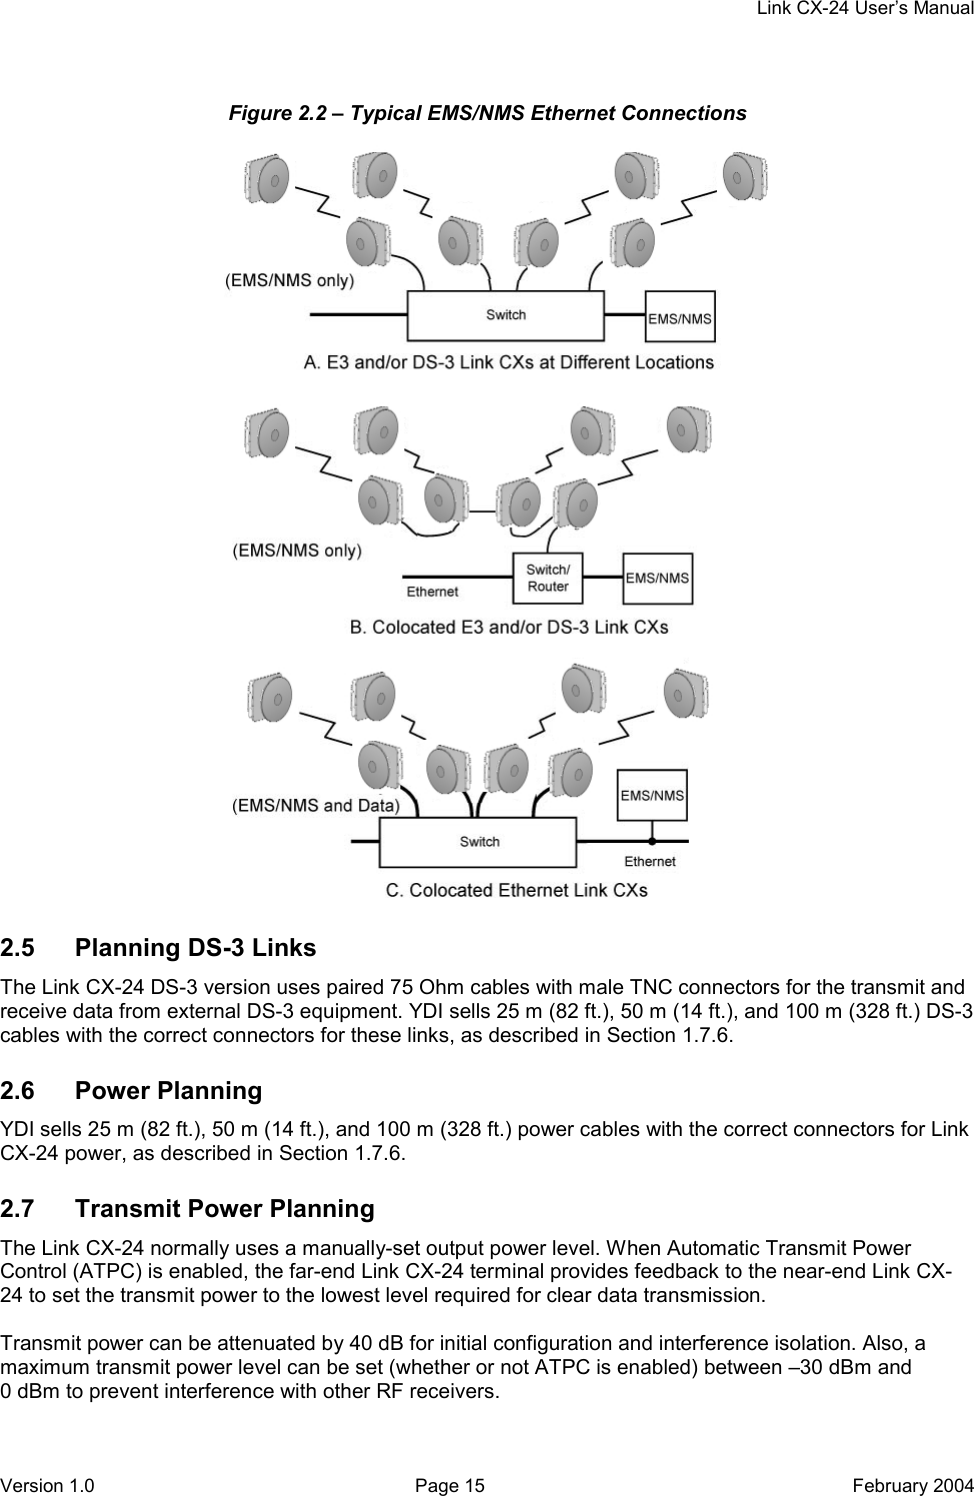     Link CX-24 User’s Manual Version 1.0  Page 15  February 2004 Figure 2.2 – Typical EMS/NMS Ethernet Connections  2.5  Planning DS-3 Links The Link CX-24 DS-3 version uses paired 75 Ohm cables with male TNC connectors for the transmit and receive data from external DS-3 equipment. YDI sells 25 m (82 ft.), 50 m (14 ft.), and 100 m (328 ft.) DS-3 cables with the correct connectors for these links, as described in Section 1.7.6. 2.6 Power Planning YDI sells 25 m (82 ft.), 50 m (14 ft.), and 100 m (328 ft.) power cables with the correct connectors for Link CX-24 power, as described in Section 1.7.6. 2.7  Transmit Power Planning The Link CX-24 normally uses a manually-set output power level. When Automatic Transmit Power Control (ATPC) is enabled, the far-end Link CX-24 terminal provides feedback to the near-end Link CX-24 to set the transmit power to the lowest level required for clear data transmission.  Transmit power can be attenuated by 40 dB for initial configuration and interference isolation. Also, a maximum transmit power level can be set (whether or not ATPC is enabled) between –30 dBm and 0 dBm to prevent interference with other RF receivers. 